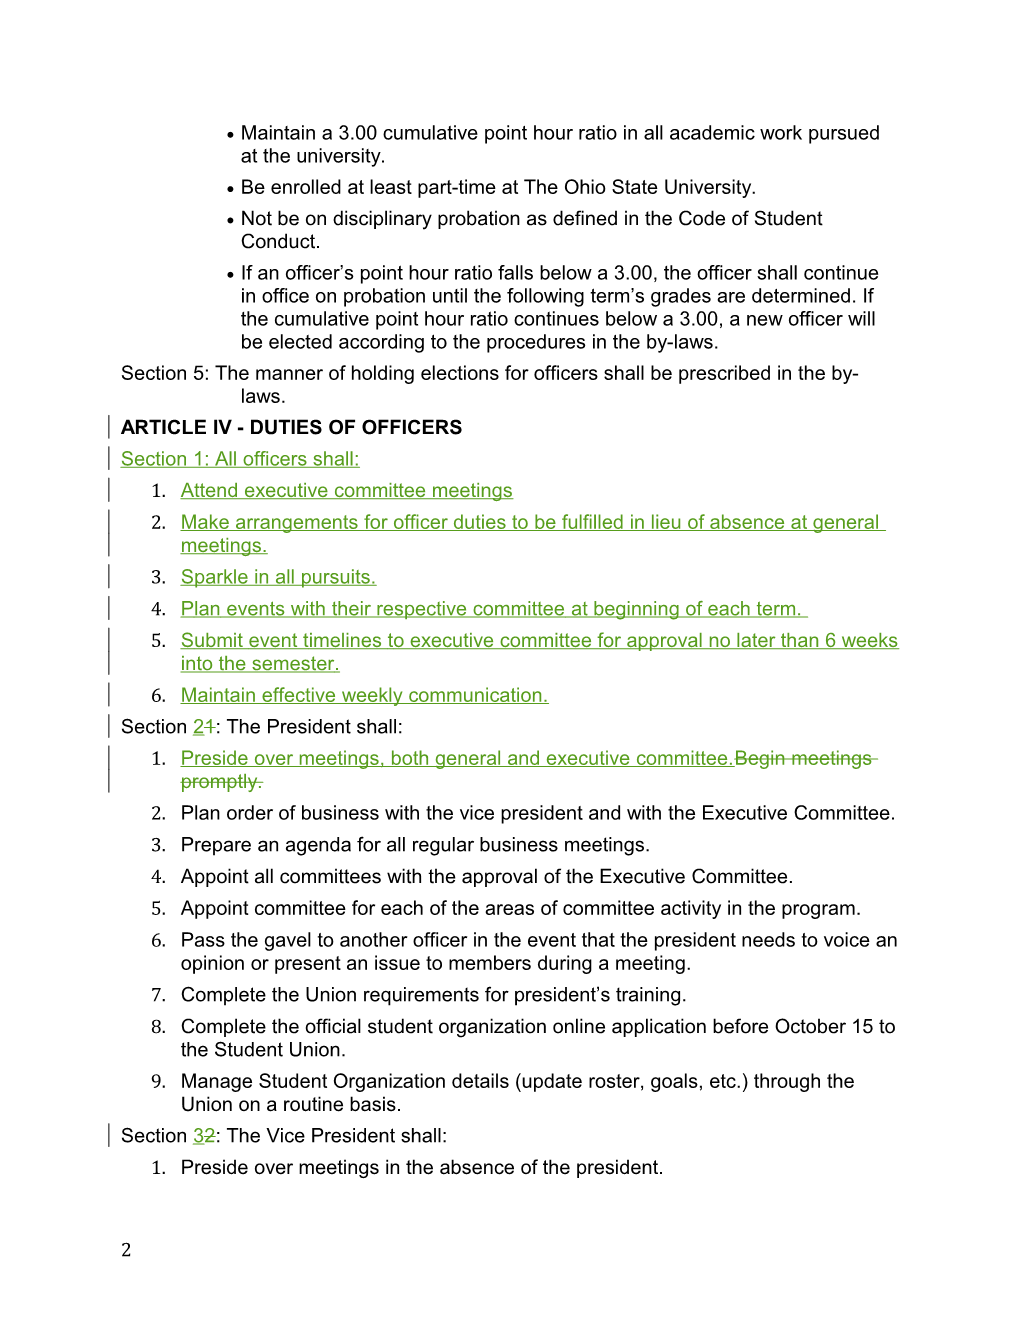 Constitution of the Graduate Student Association